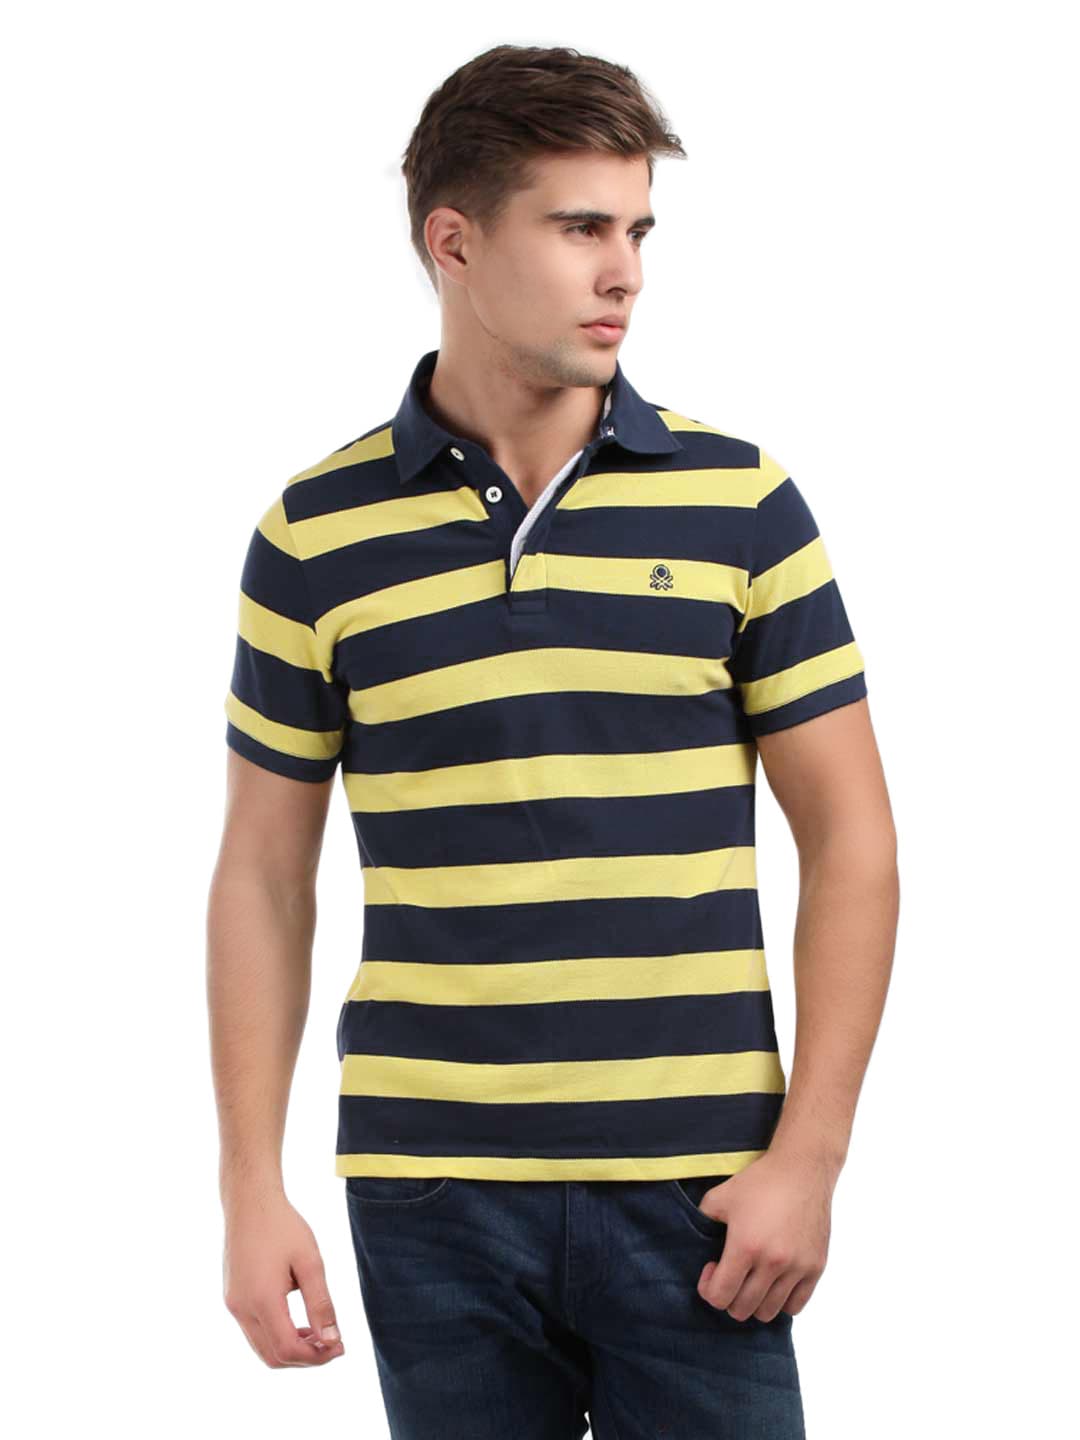 United Colors of Benetton Men Navy Blue & Yellow Striped Polo T-shirt